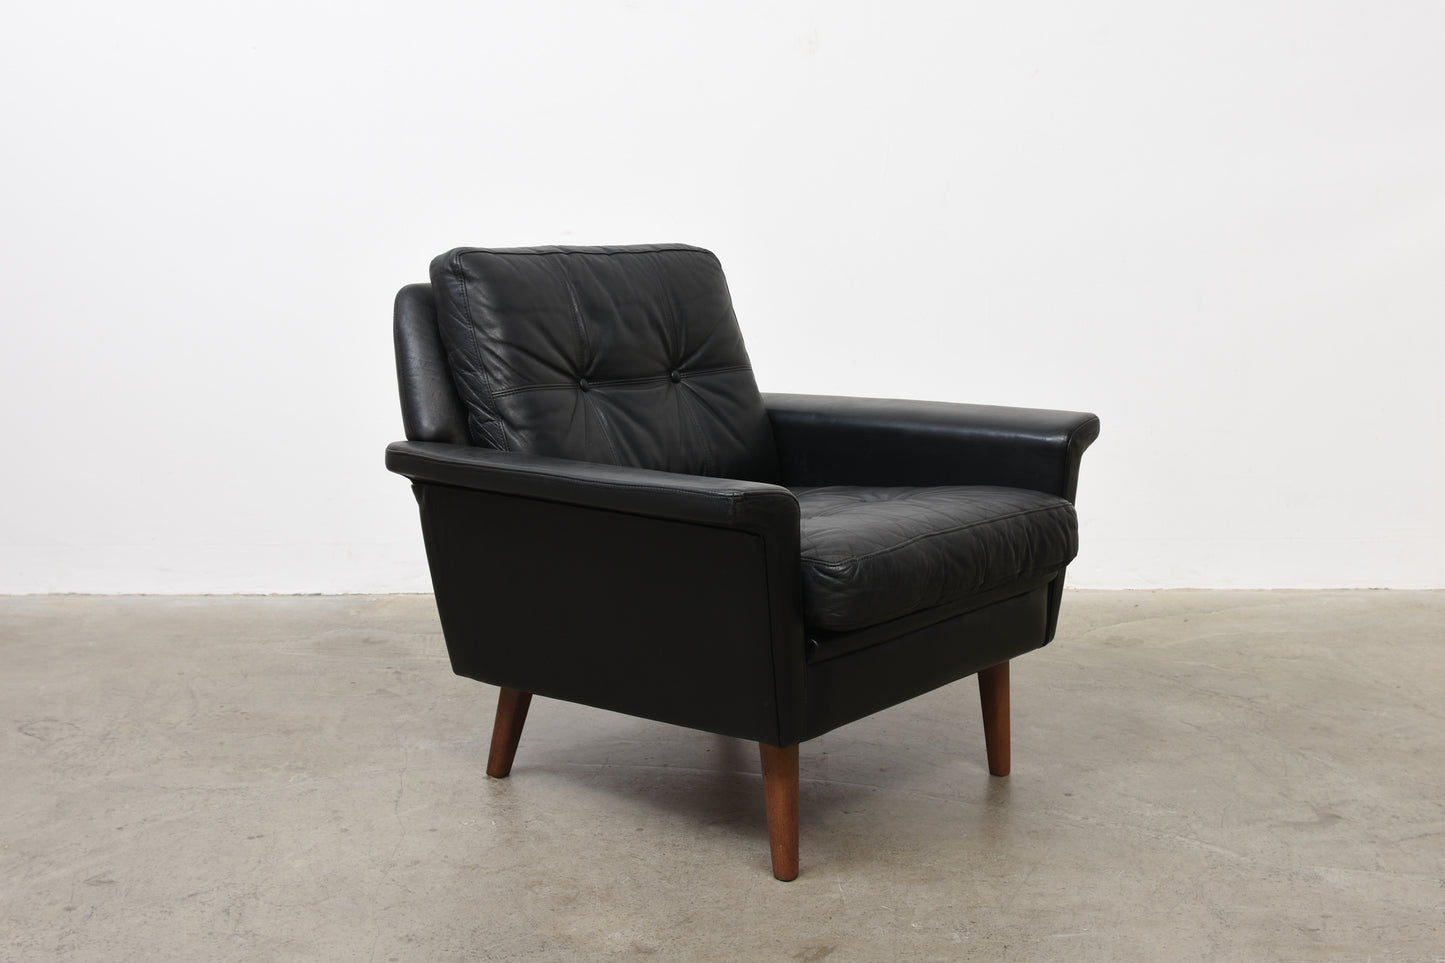 1960s leather lounger by Nili